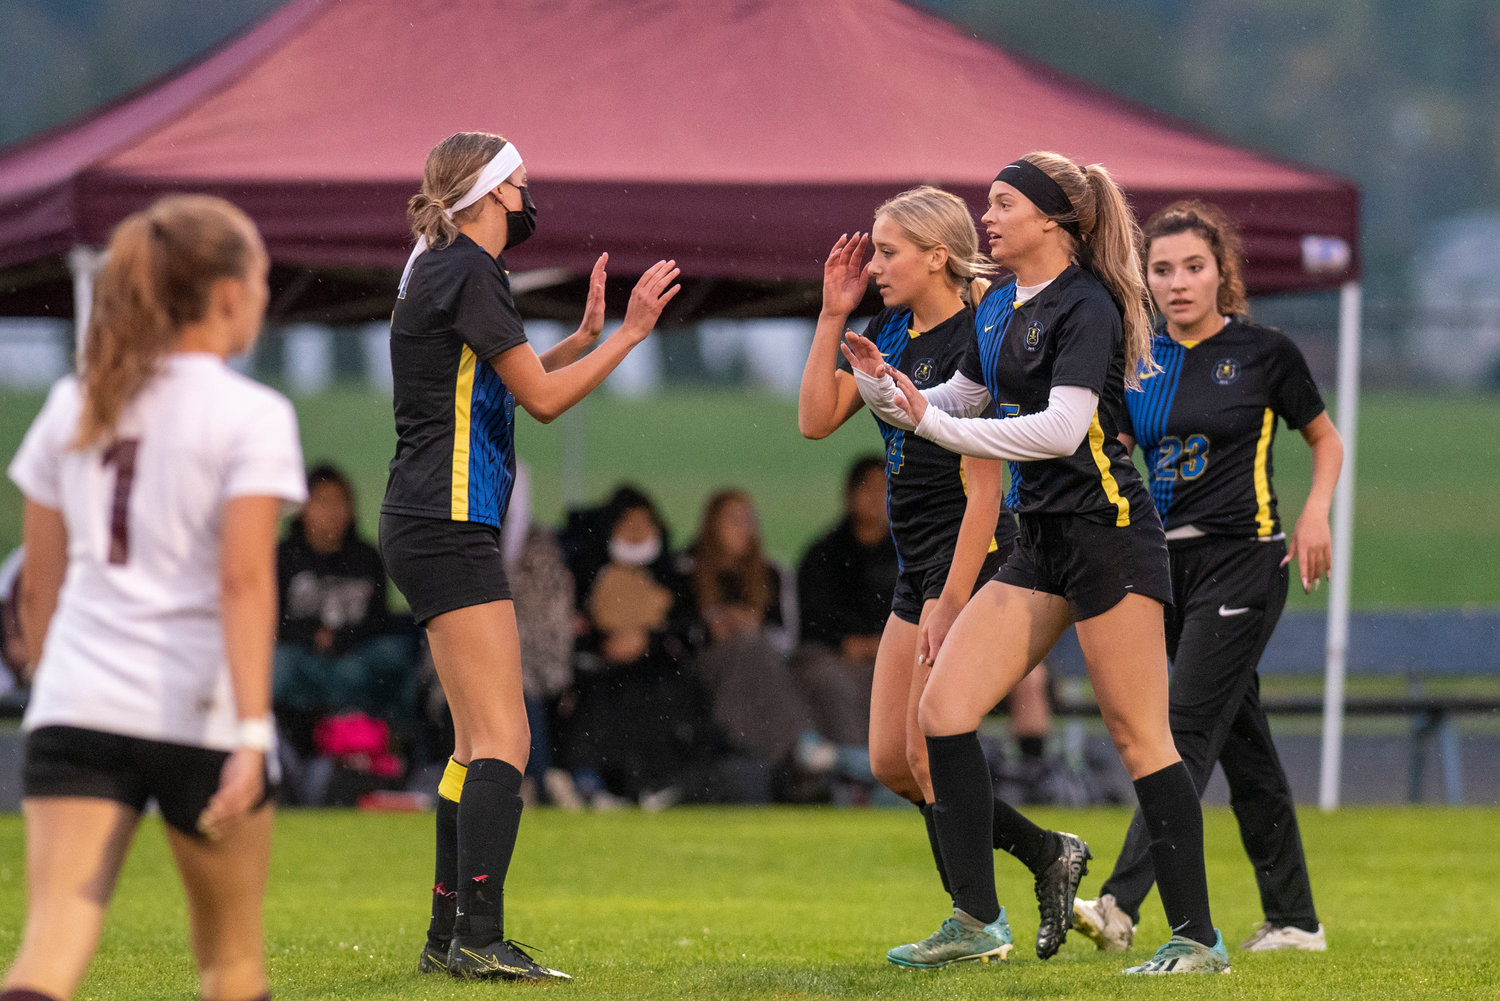 Adna players celebrate Kaylin Todd's opening goal of the game against Raymond-South Bend on Oct. 13, 2021.